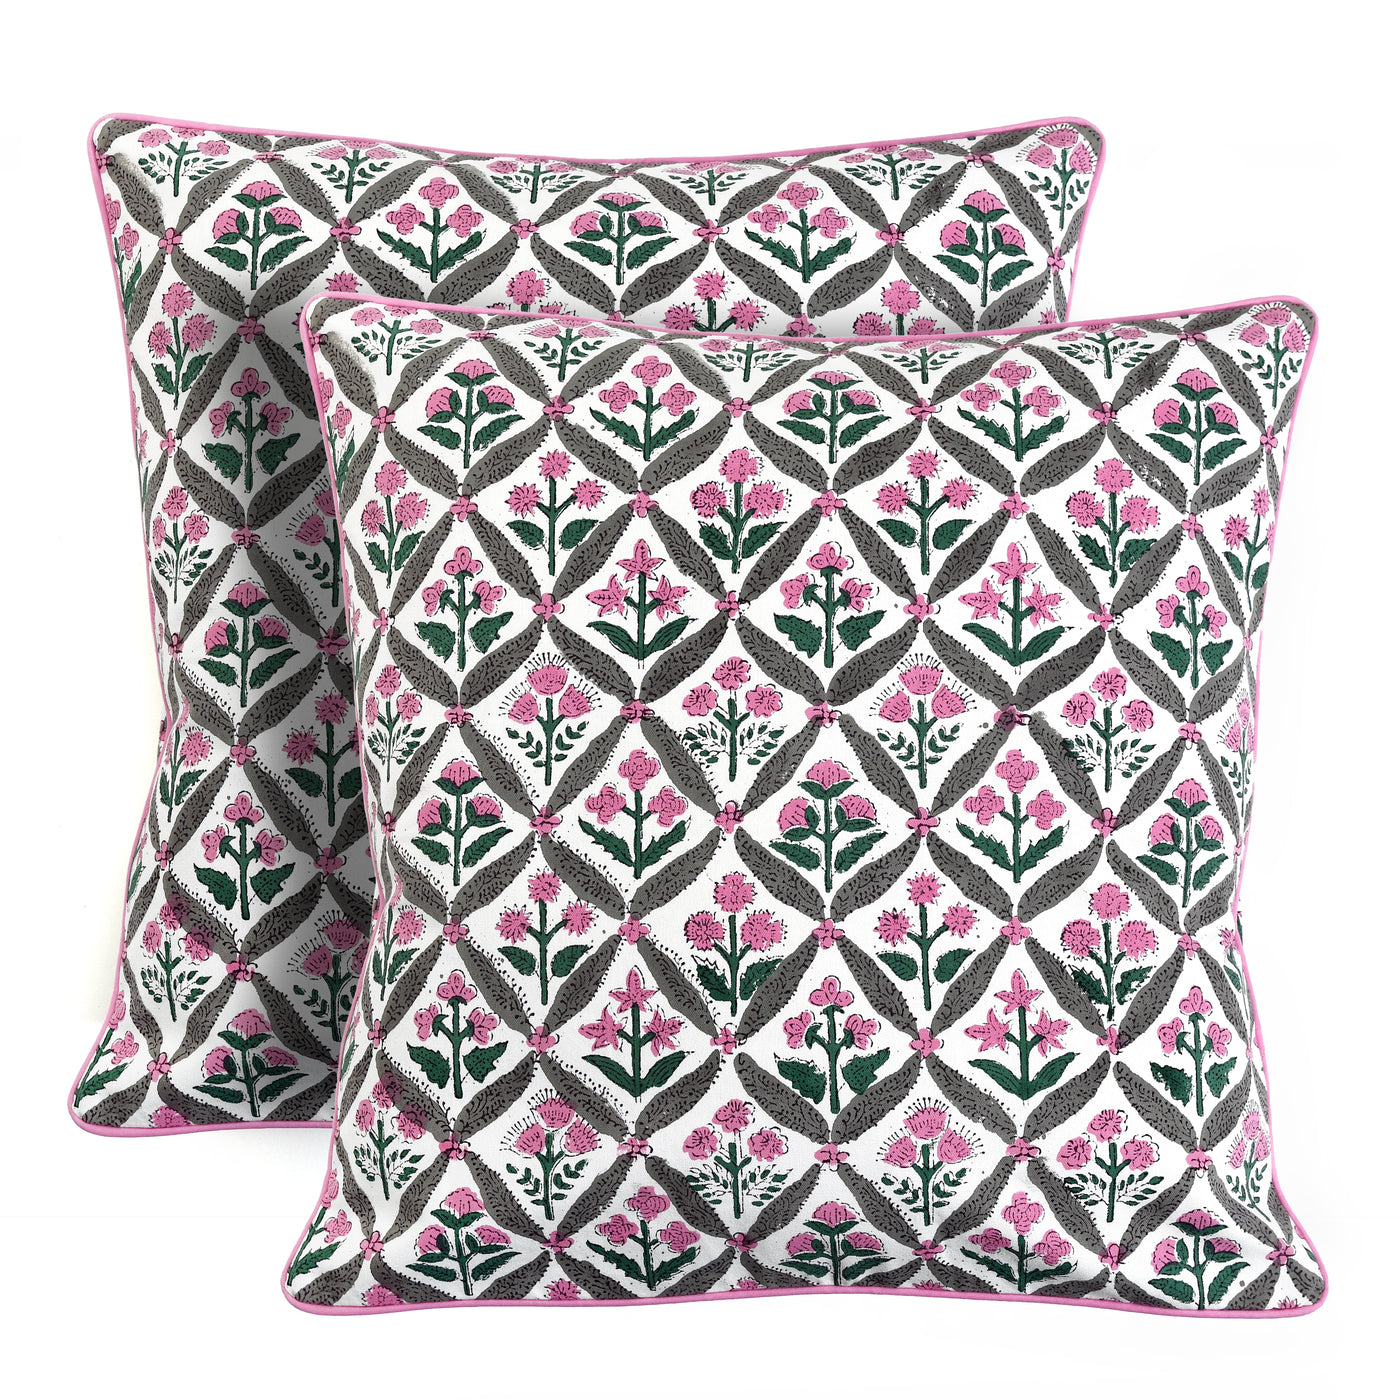 Fabricrush Pillow Covers, Watermelon Pink Hand Block Printed Floral Throw Pillow Covers, Cushion Covers for Decorative Couches, Living Rooms, Designers Pillow Covers